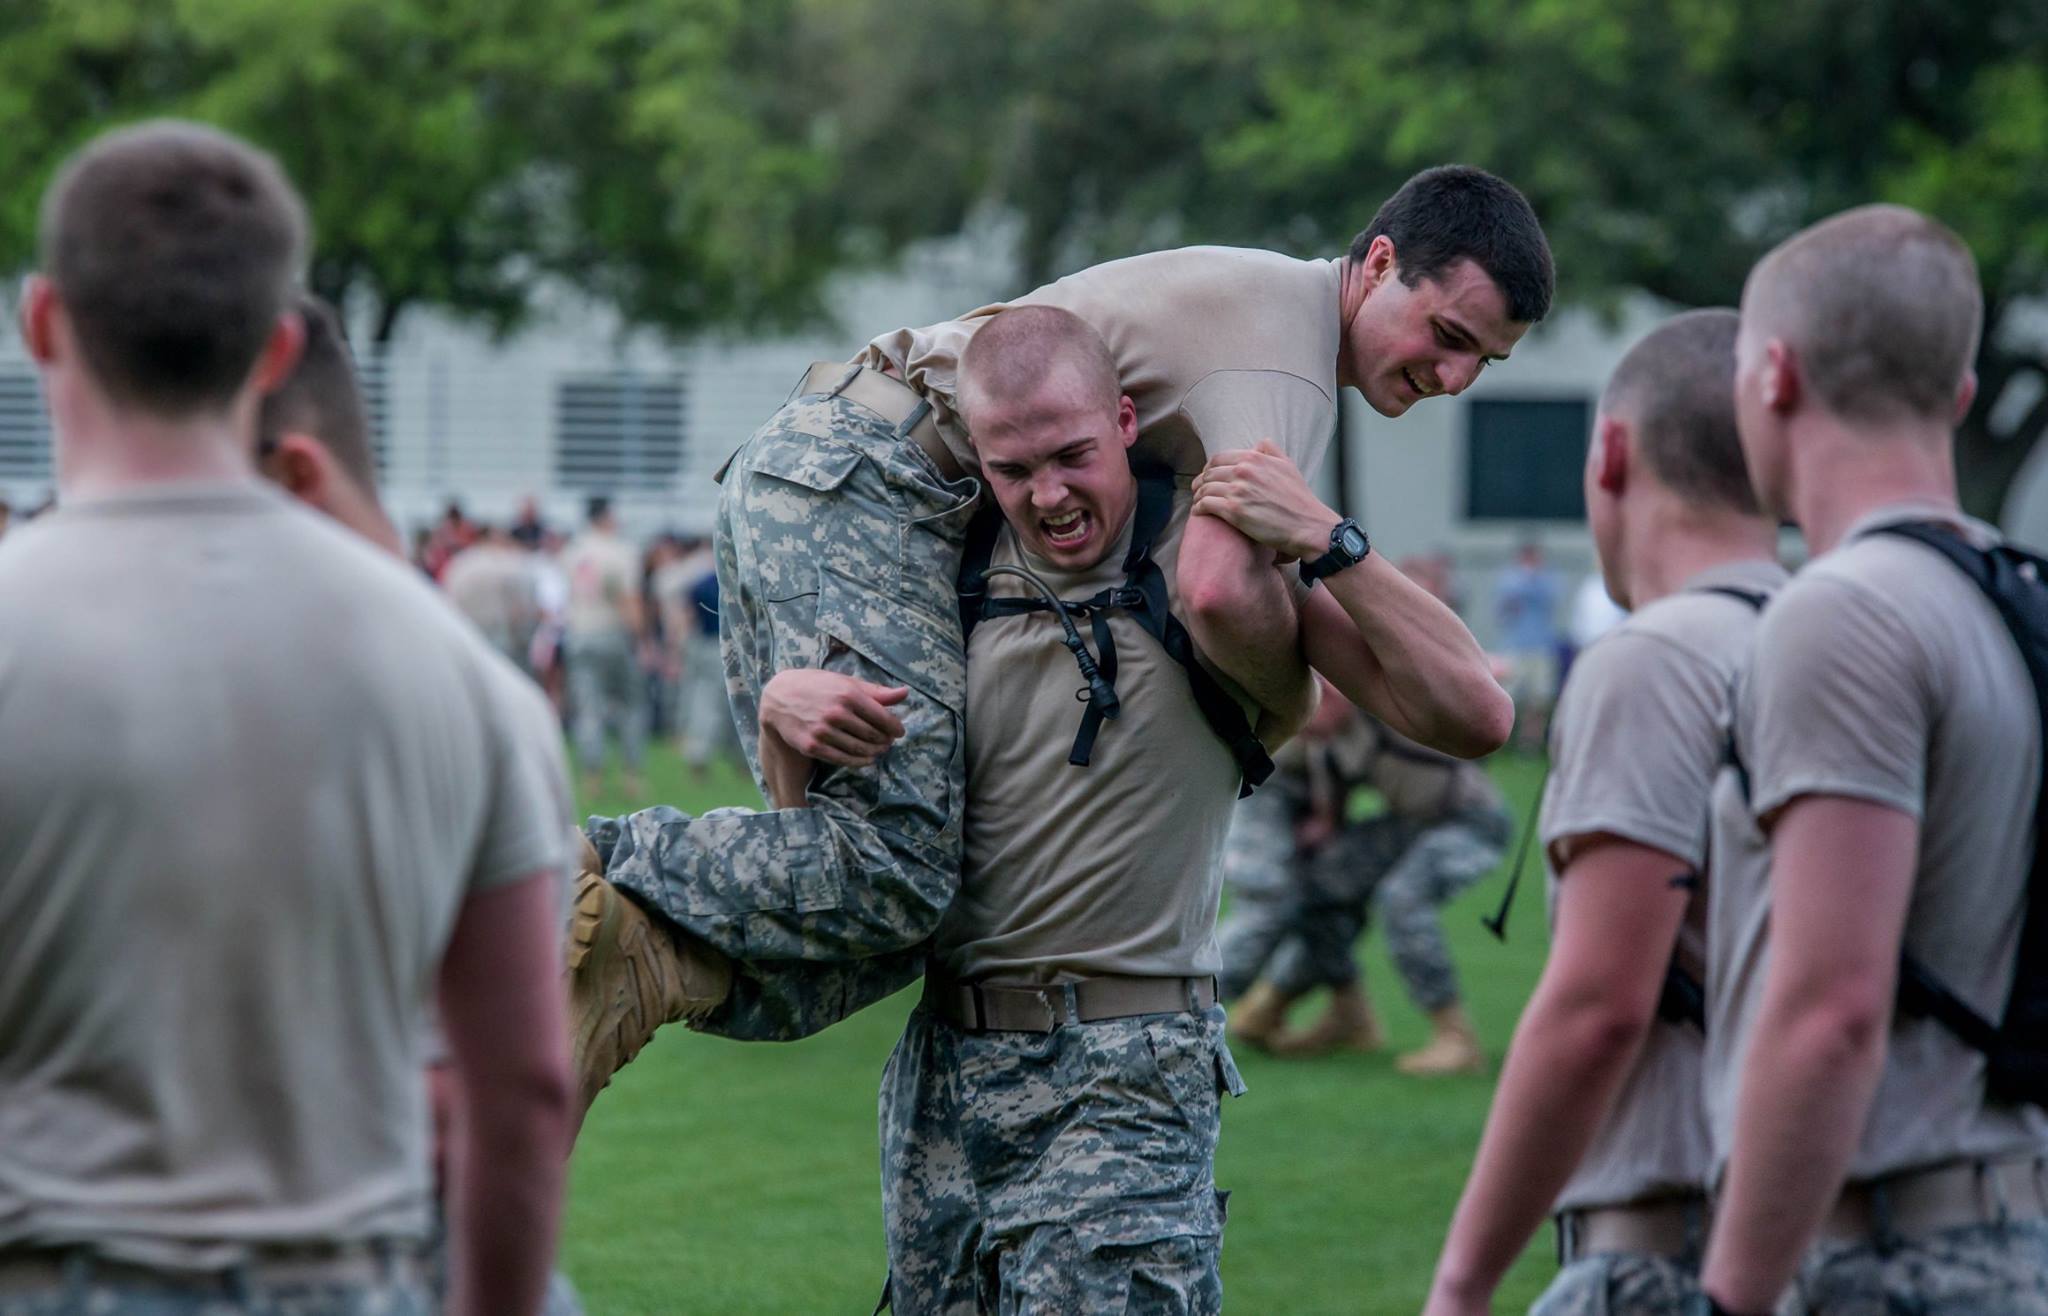 A 4th Class cadet carries and upperclass cadet at one of the stations during the "Gauntlet."